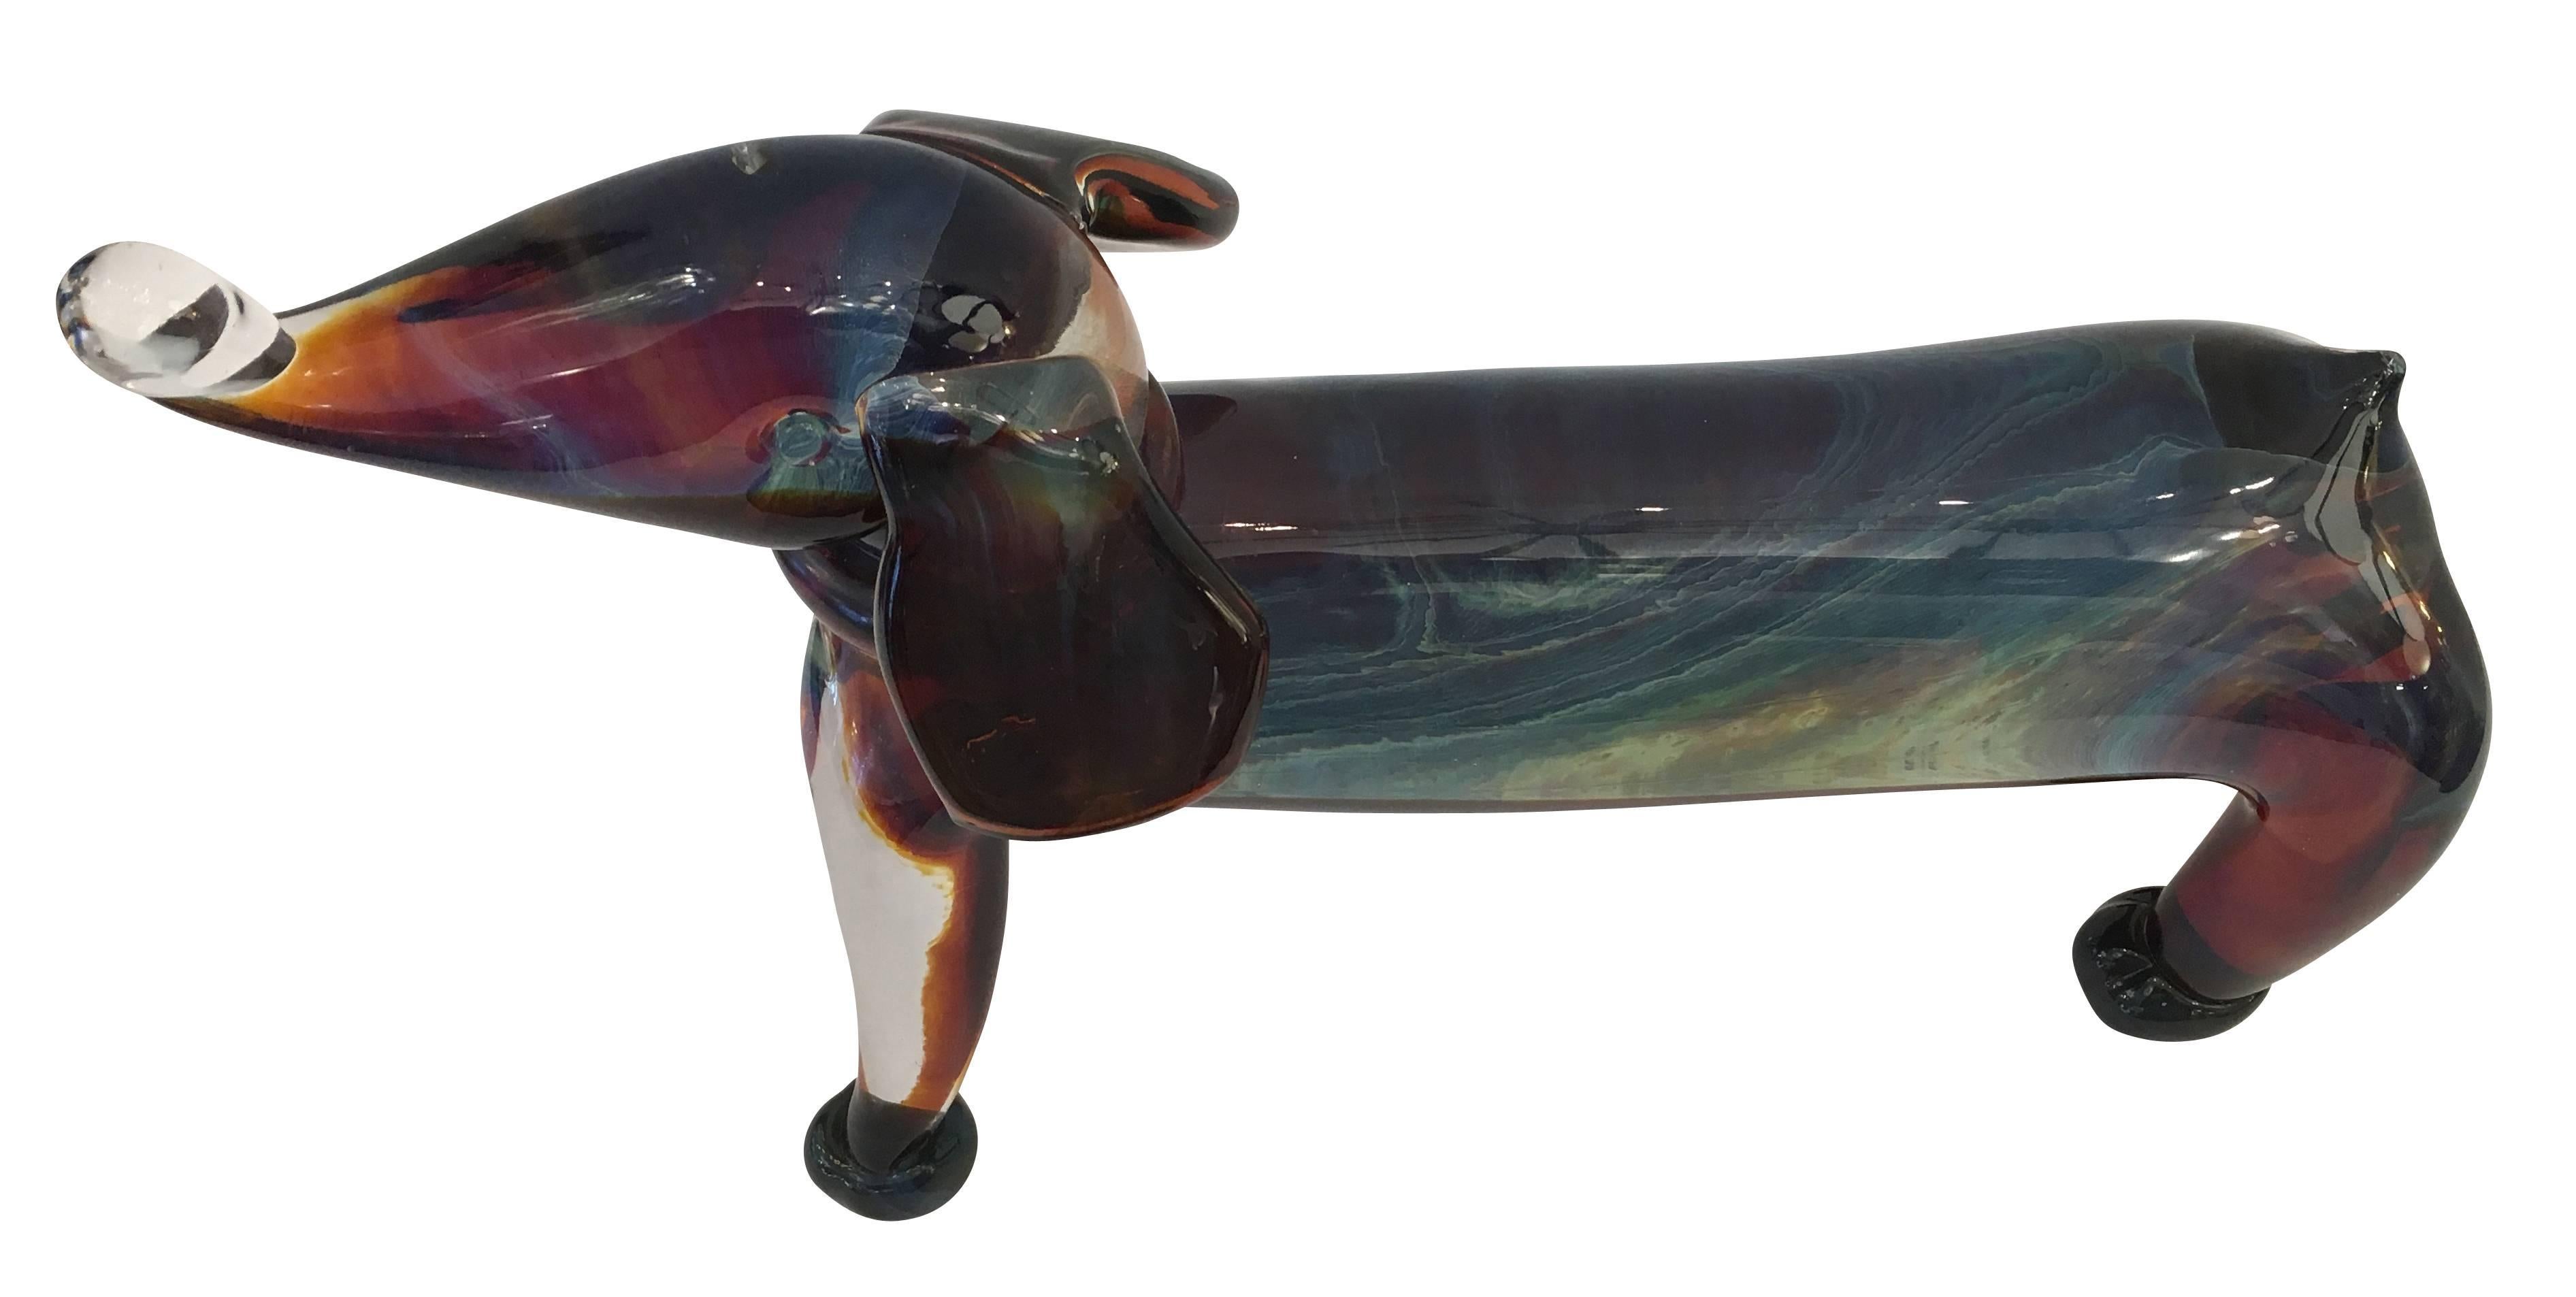 Playful handblown Murano glass dog sculpture from the 1960s. Made in the “Sommerso” technique allowing the color to change depending on the viewing angle.

Available for viewing at Gaspare Asaro-Italian Modern in NYC